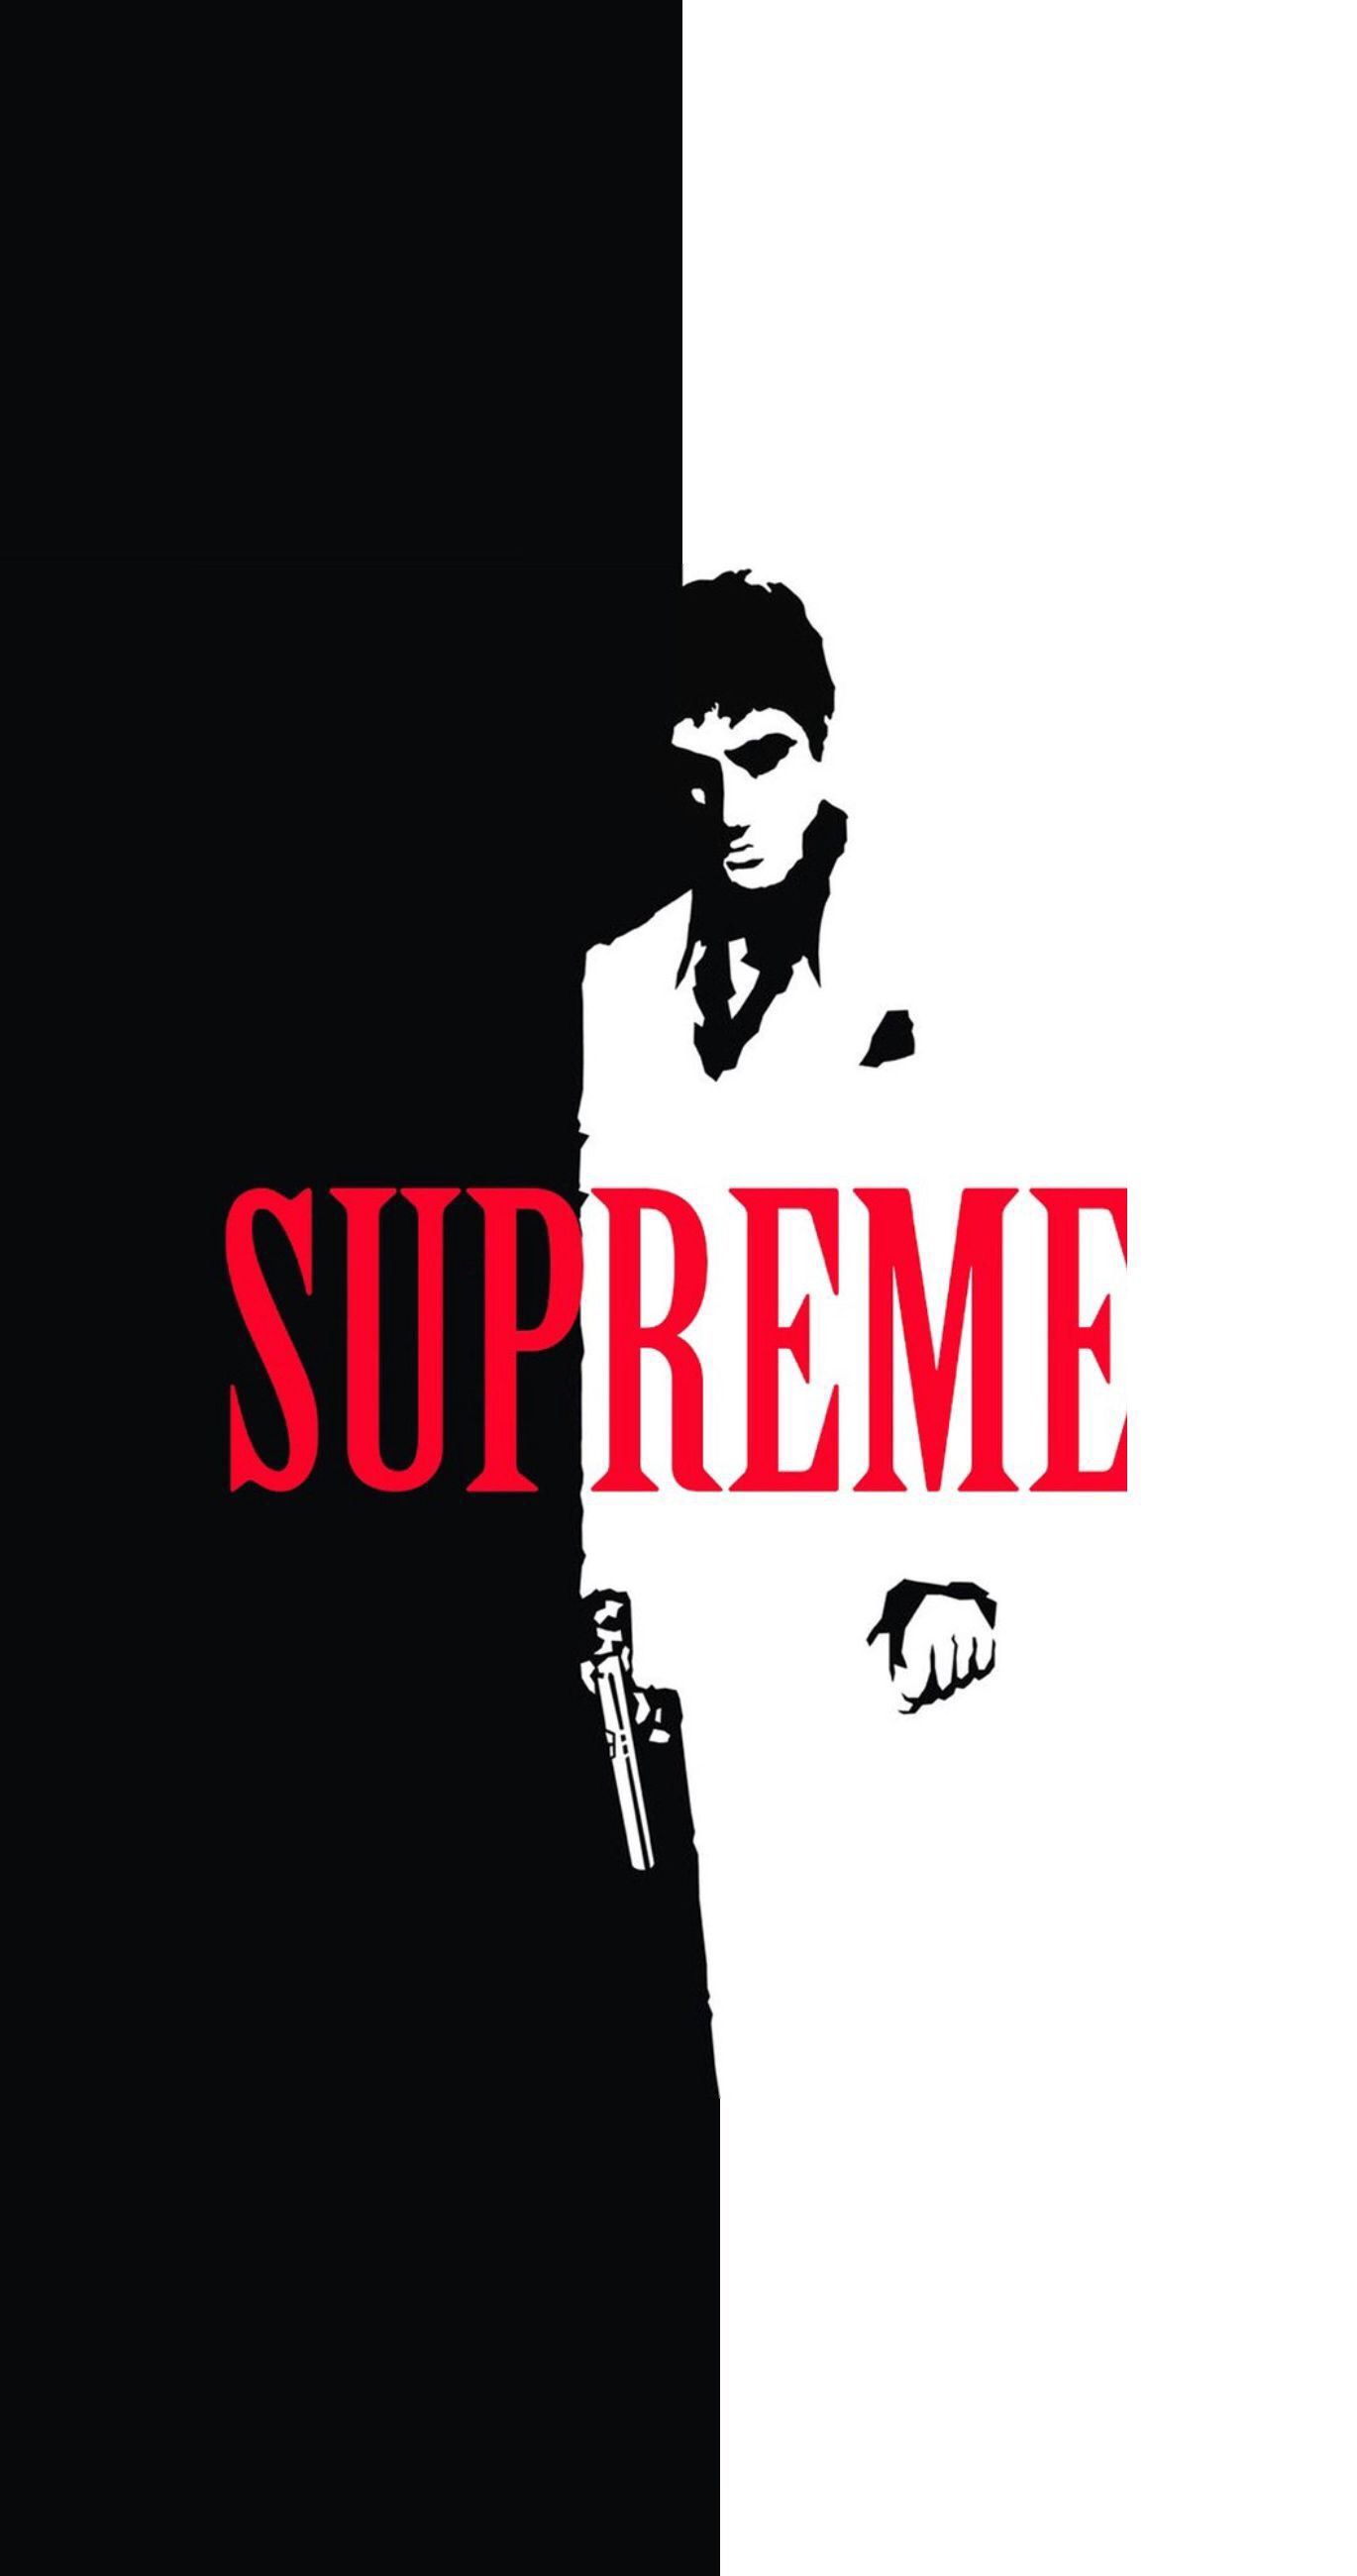 Free Download Supreme Phone Wallpapers Top Supreme Phone Backgrounds 1370x2601 For Your Desktop Mobile Tablet Explore 46 Supreme Wallpaper Iphone Vertical Supreme Wallpaper Iphone Vertical Supreme Iphone Wallpapers Supreme Iphone Wallpaper